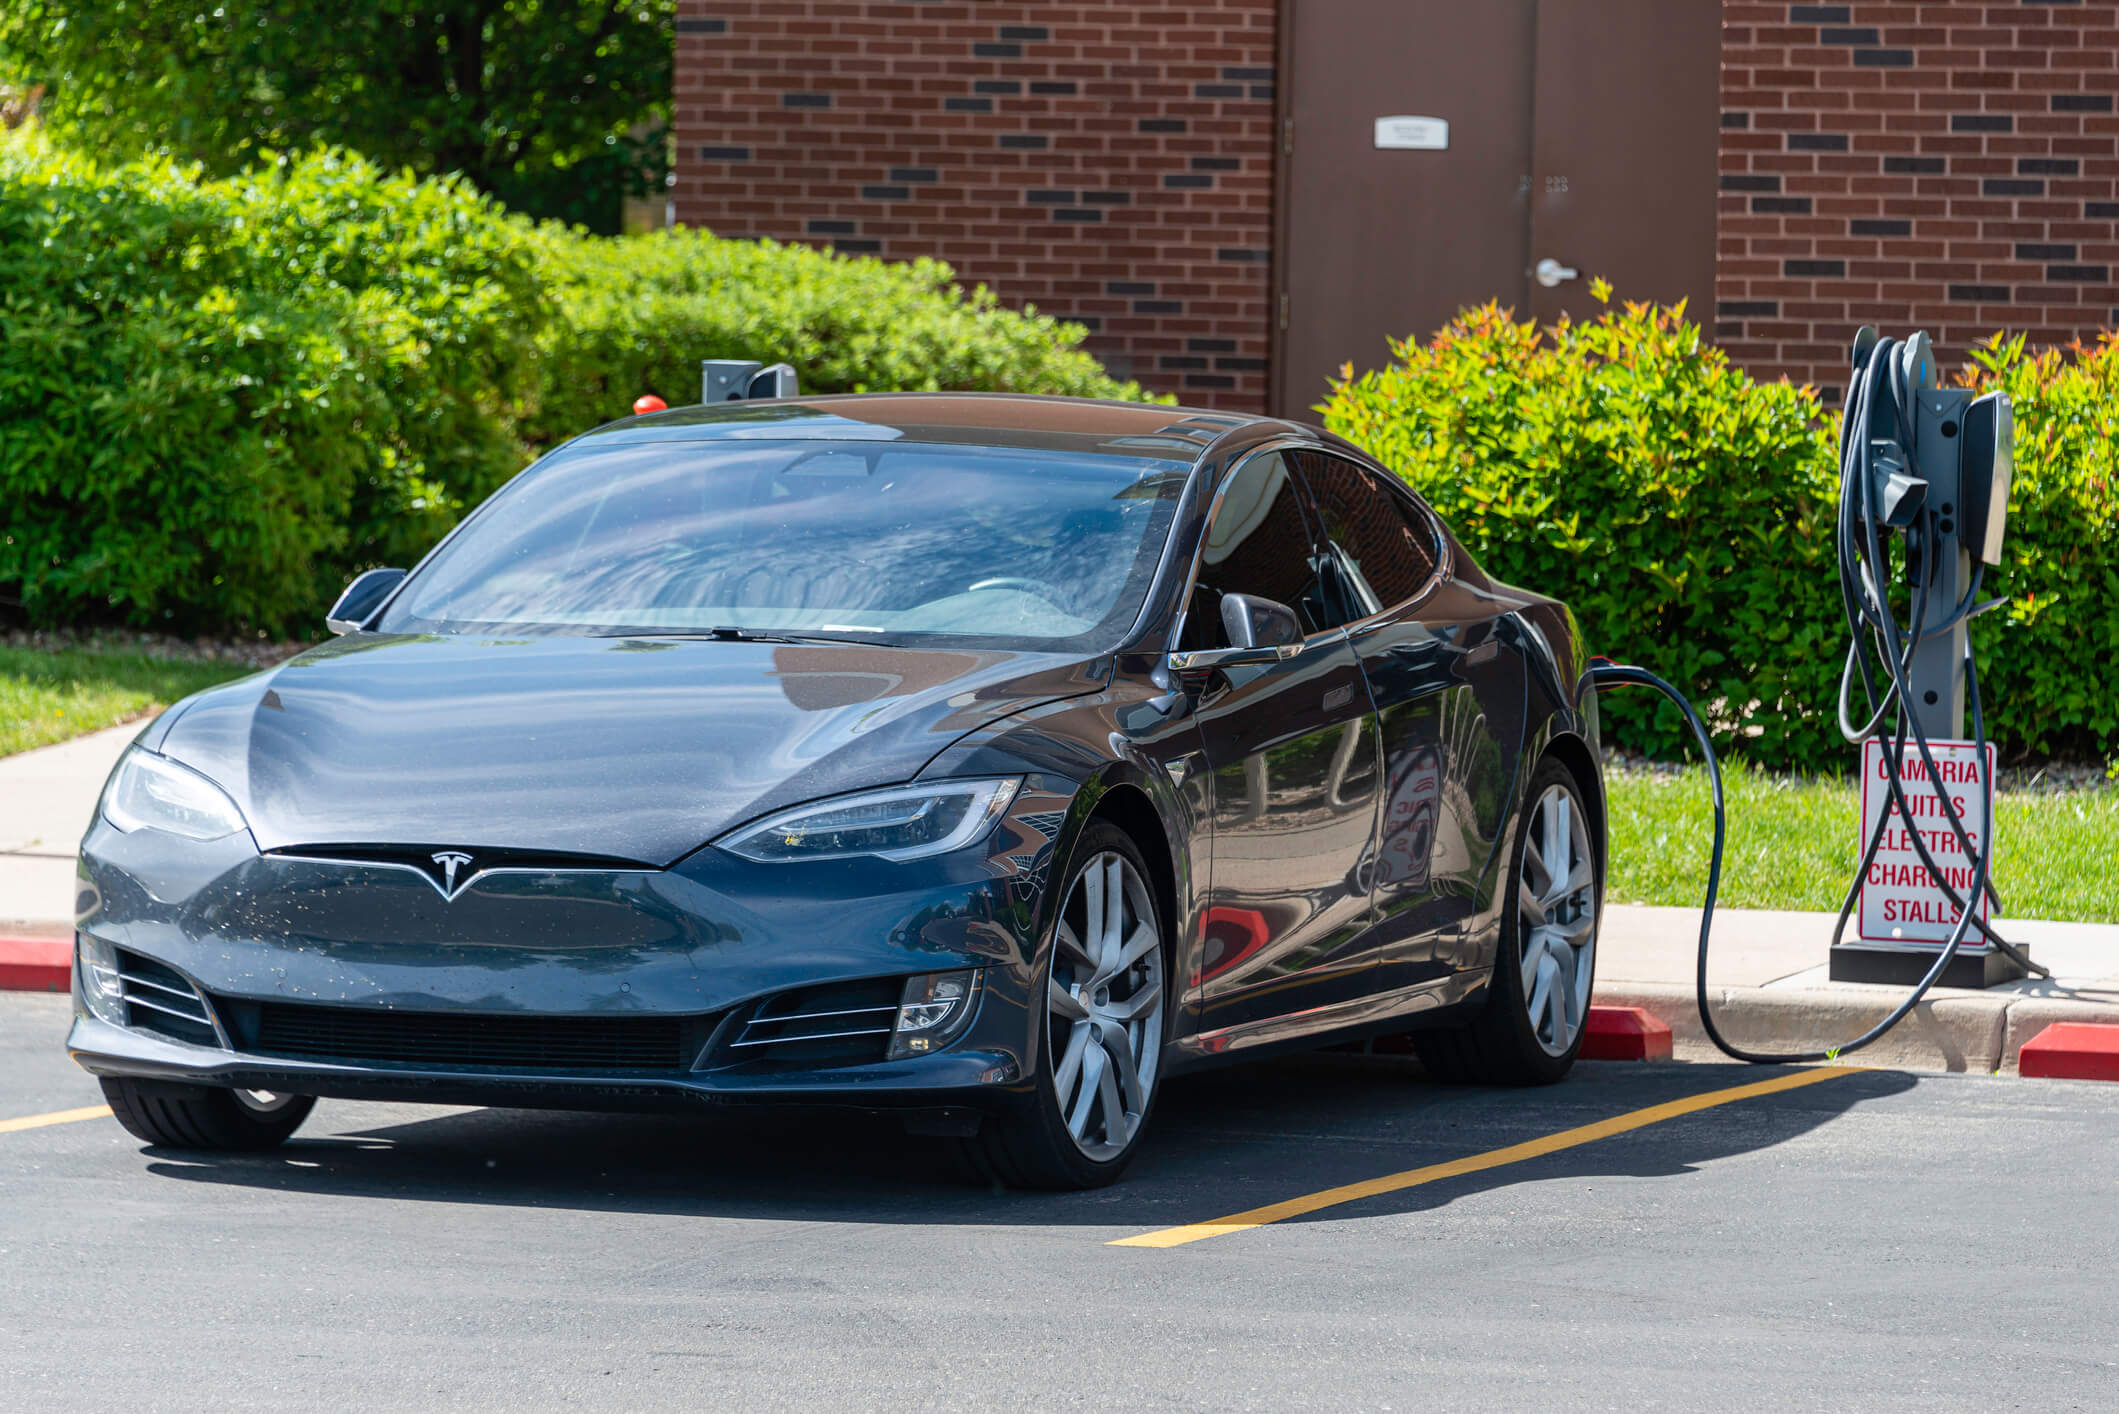 TheLemonFirm.com discusses the different kinds of defects that are often in Tesla Motors vehicles.